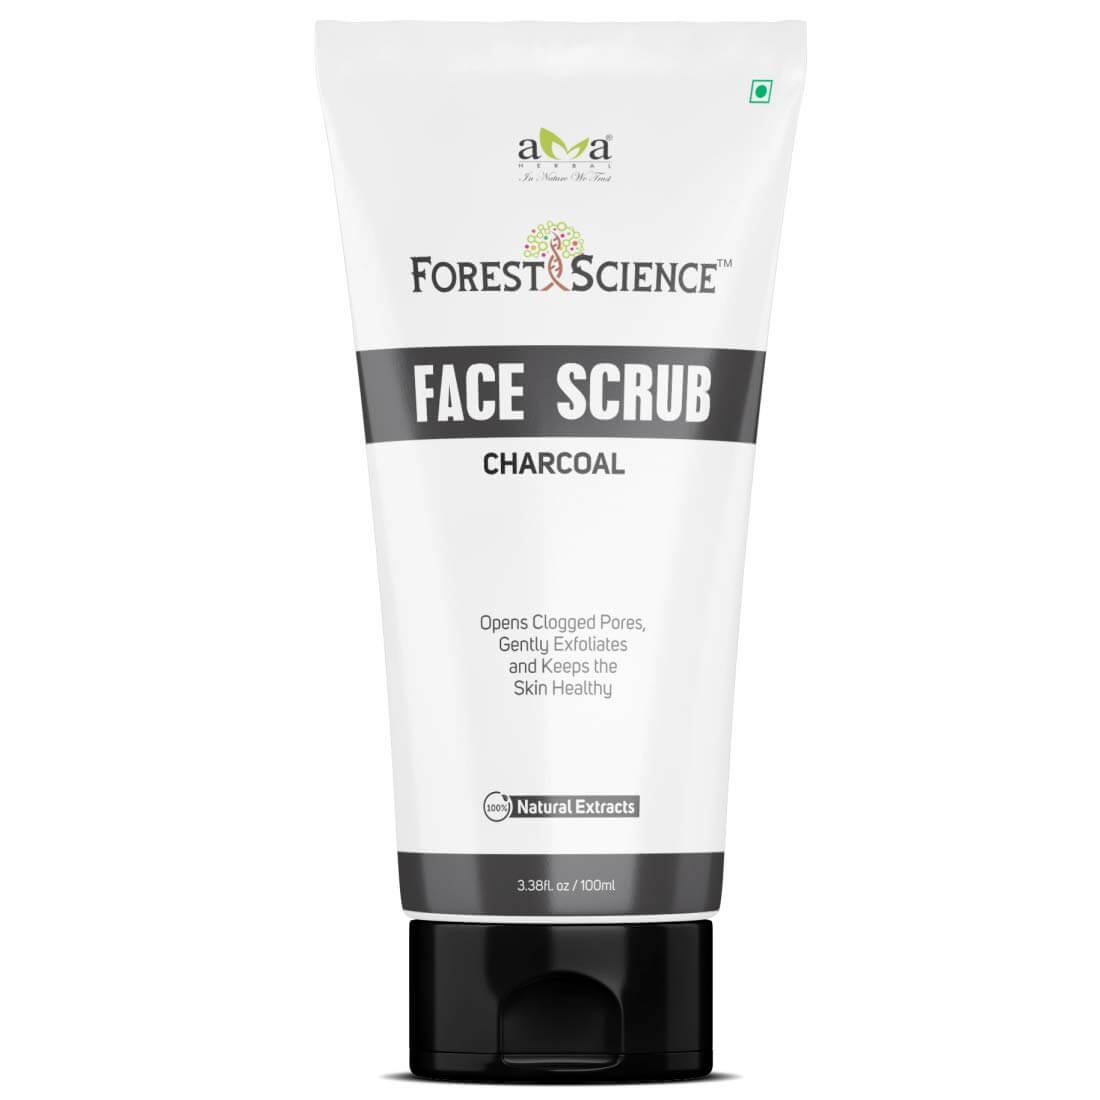 Forest Science Charcoal Face Scrubs for men